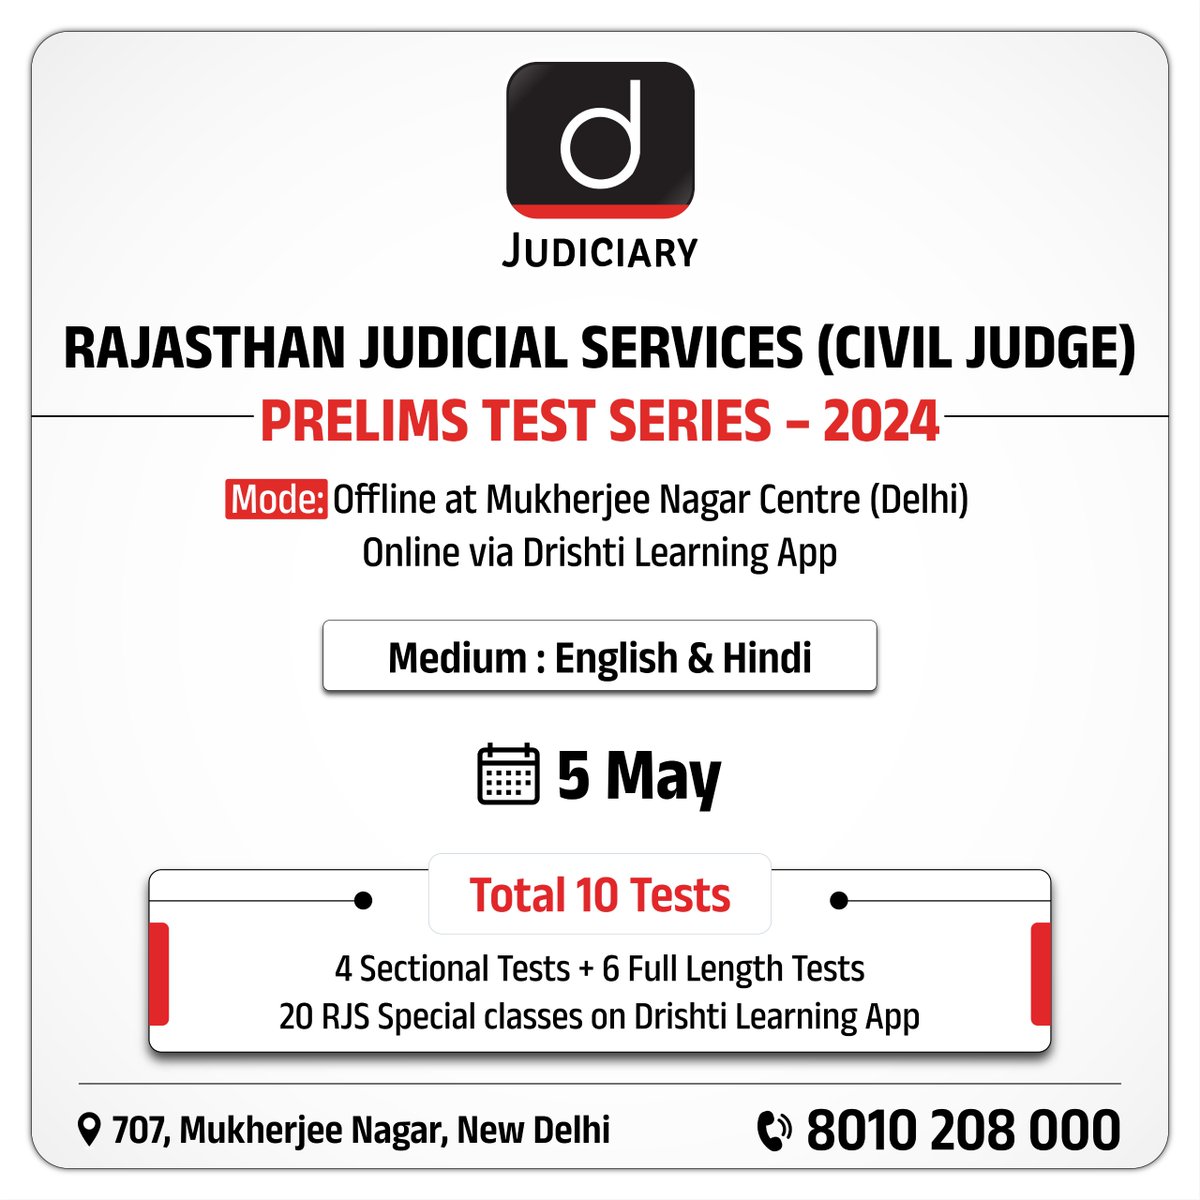 Lay the foundation for your #CivilJudge career with our #Rajasthan #JudicialServices #Prelims #TestSeries 2024!

Check the link: drishti.xyz/RJSCivilJudge-…

#Judiciary #Prelims2024 #Law #Quiz #JudiciaryPreparation #Judge #Preparation #Judicial #Legal #DrishtiJudiciary #TeamDrishti